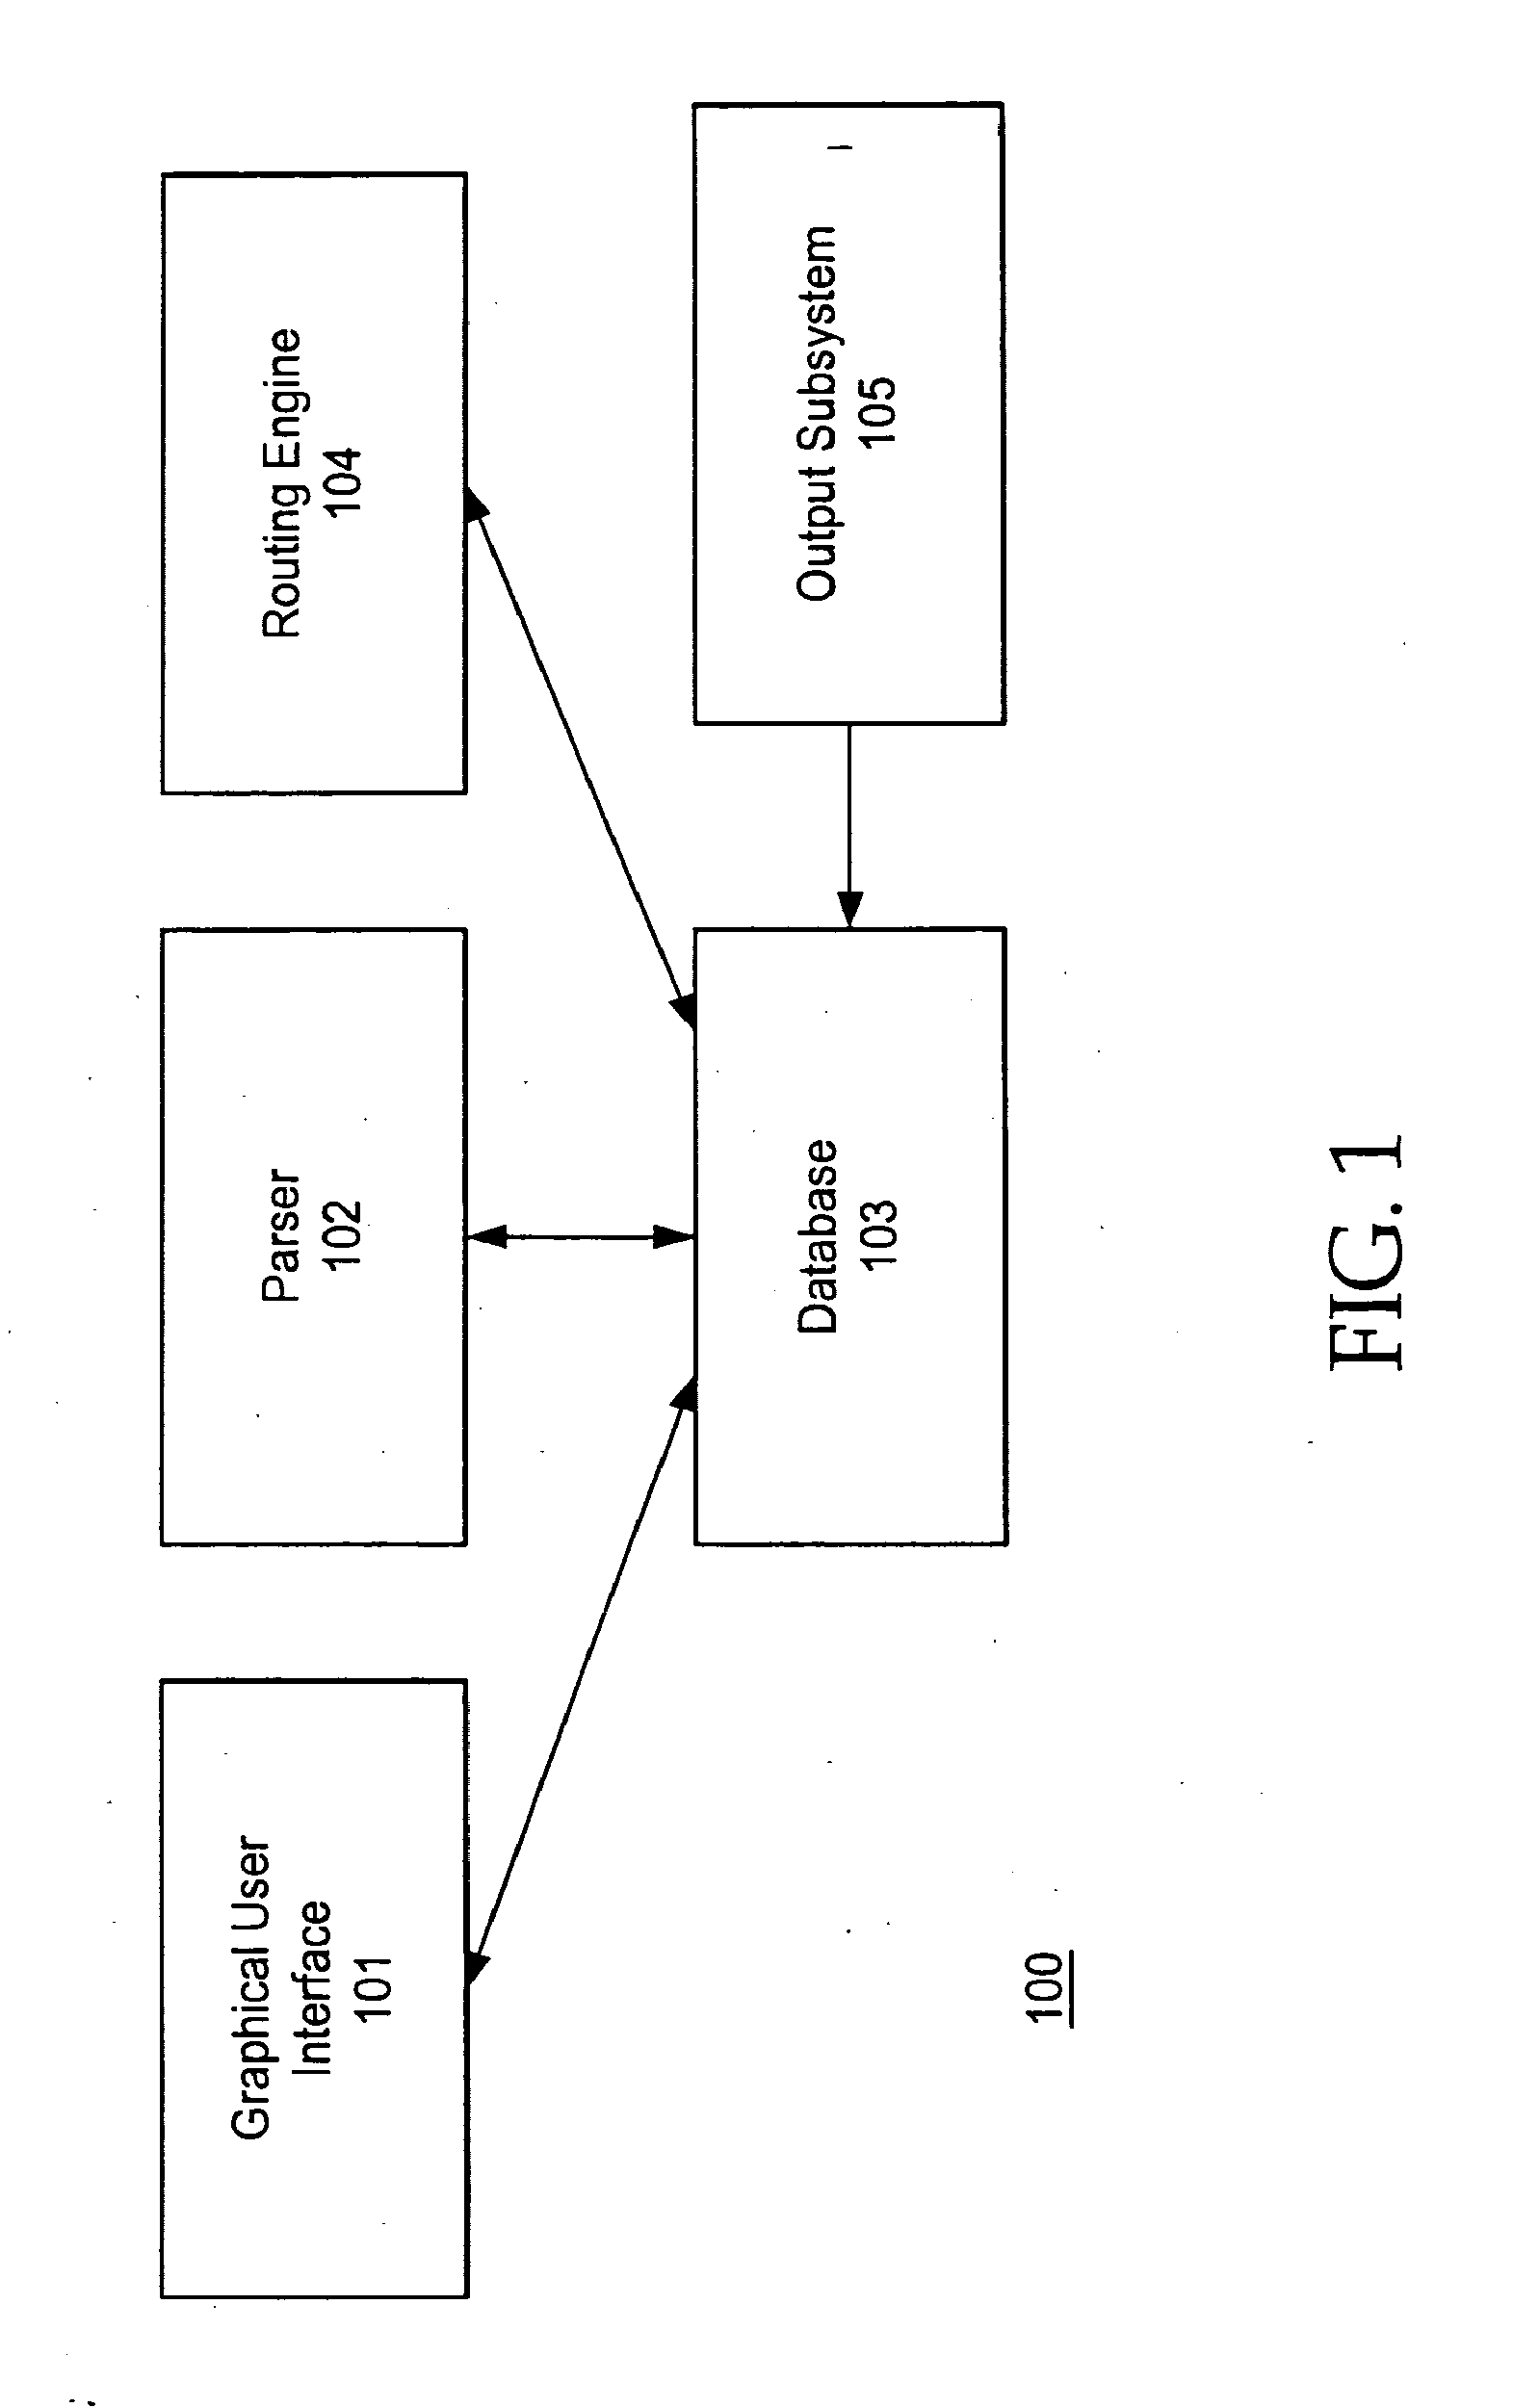 Routing interconnect of integrated circuit designs with varying grid densities